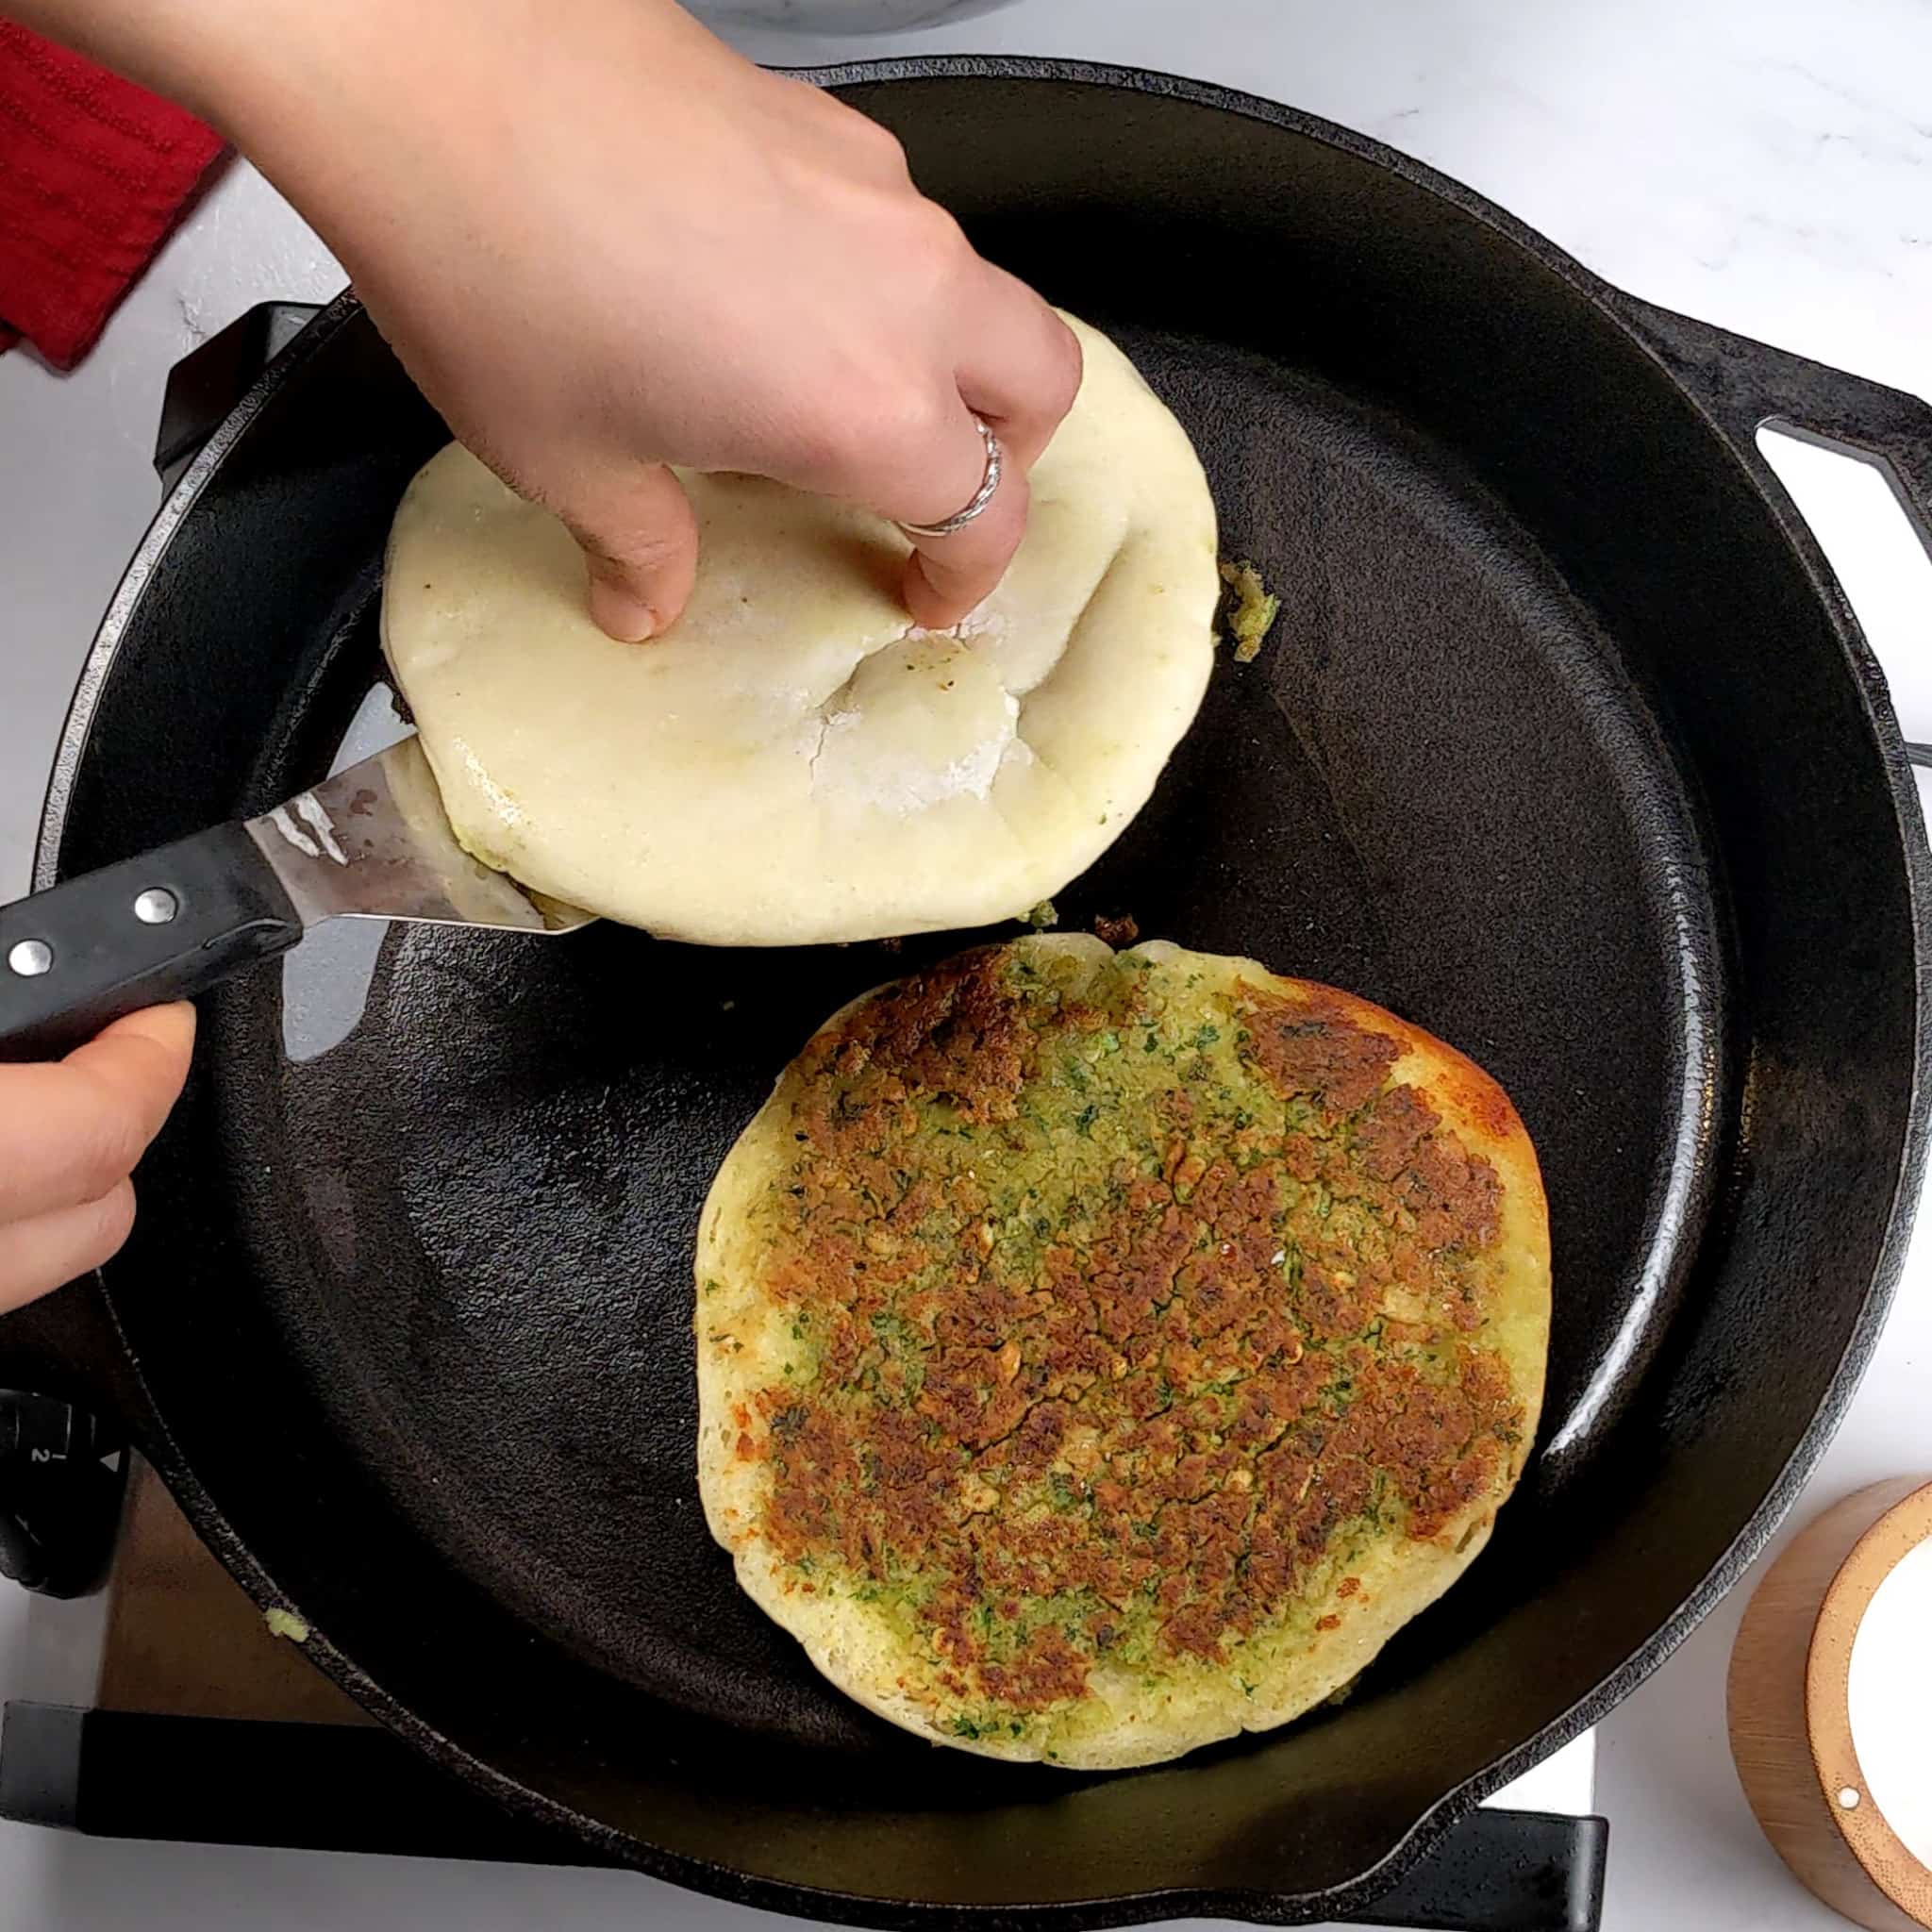 two falafel pitas in a cast iron skillet, one is falafel side up golden brown while the other is in the middle of being flipped with an offset spatula.